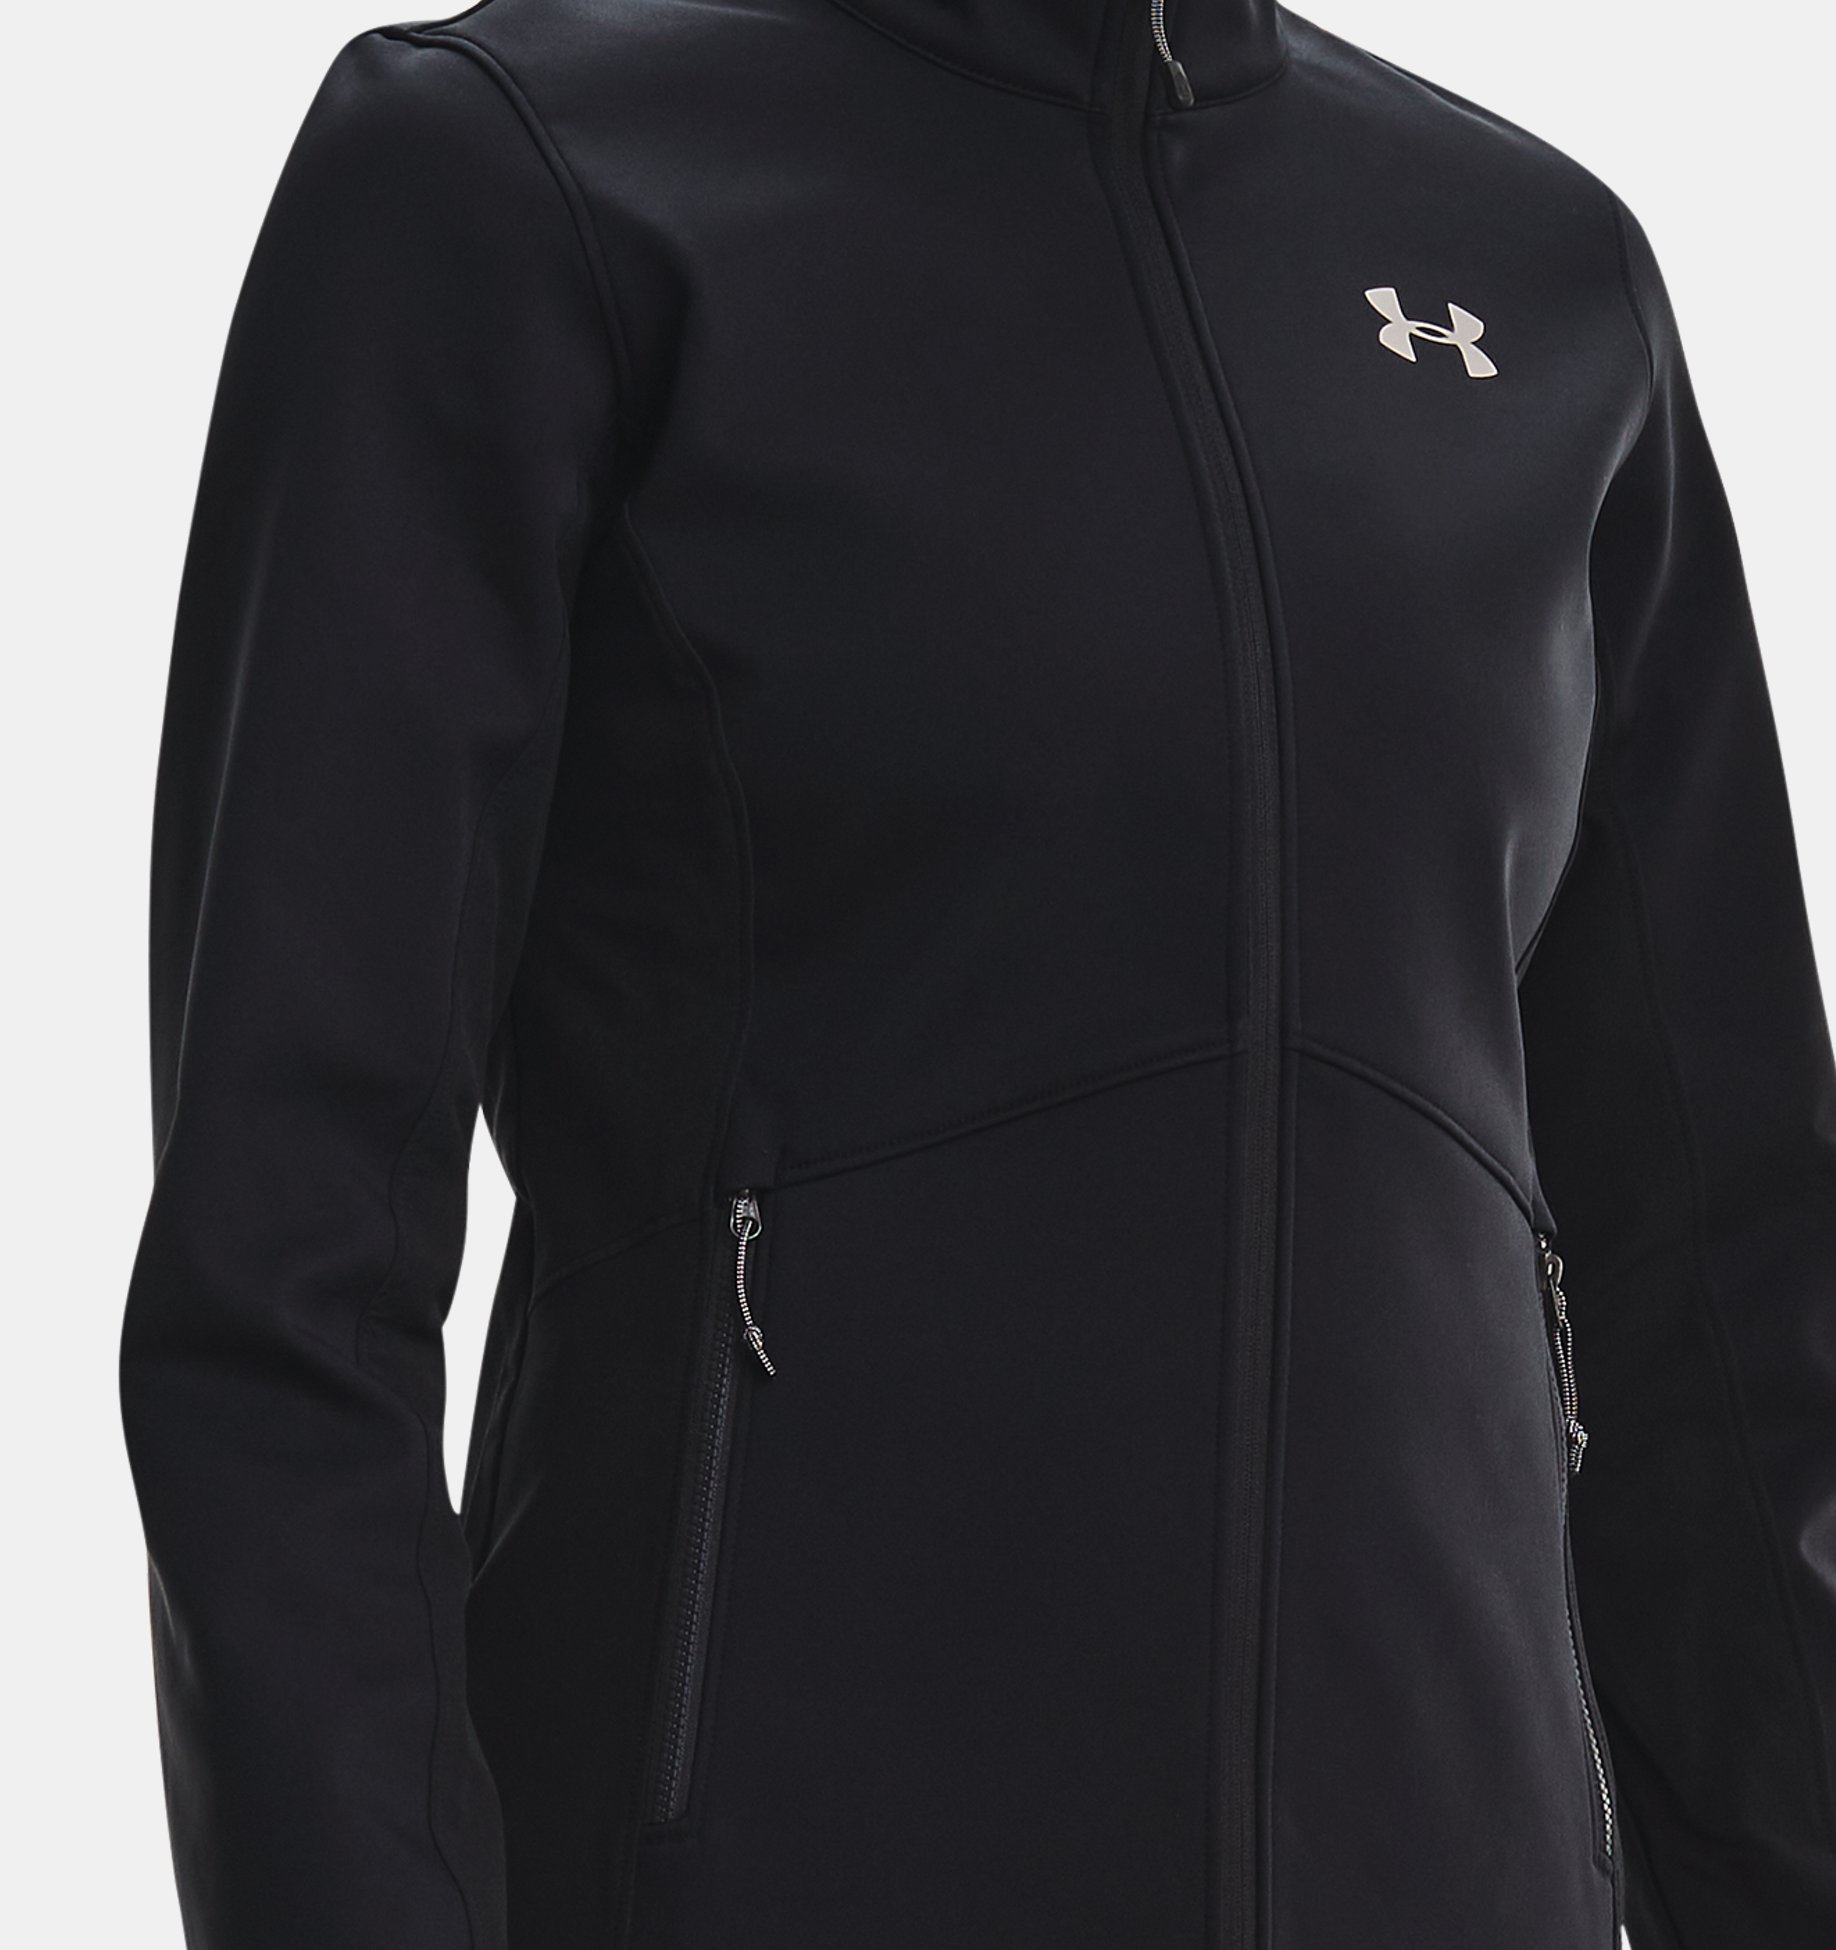 North Face Vs Under Armour (The Definitive Guide) - Unlock Wilderness